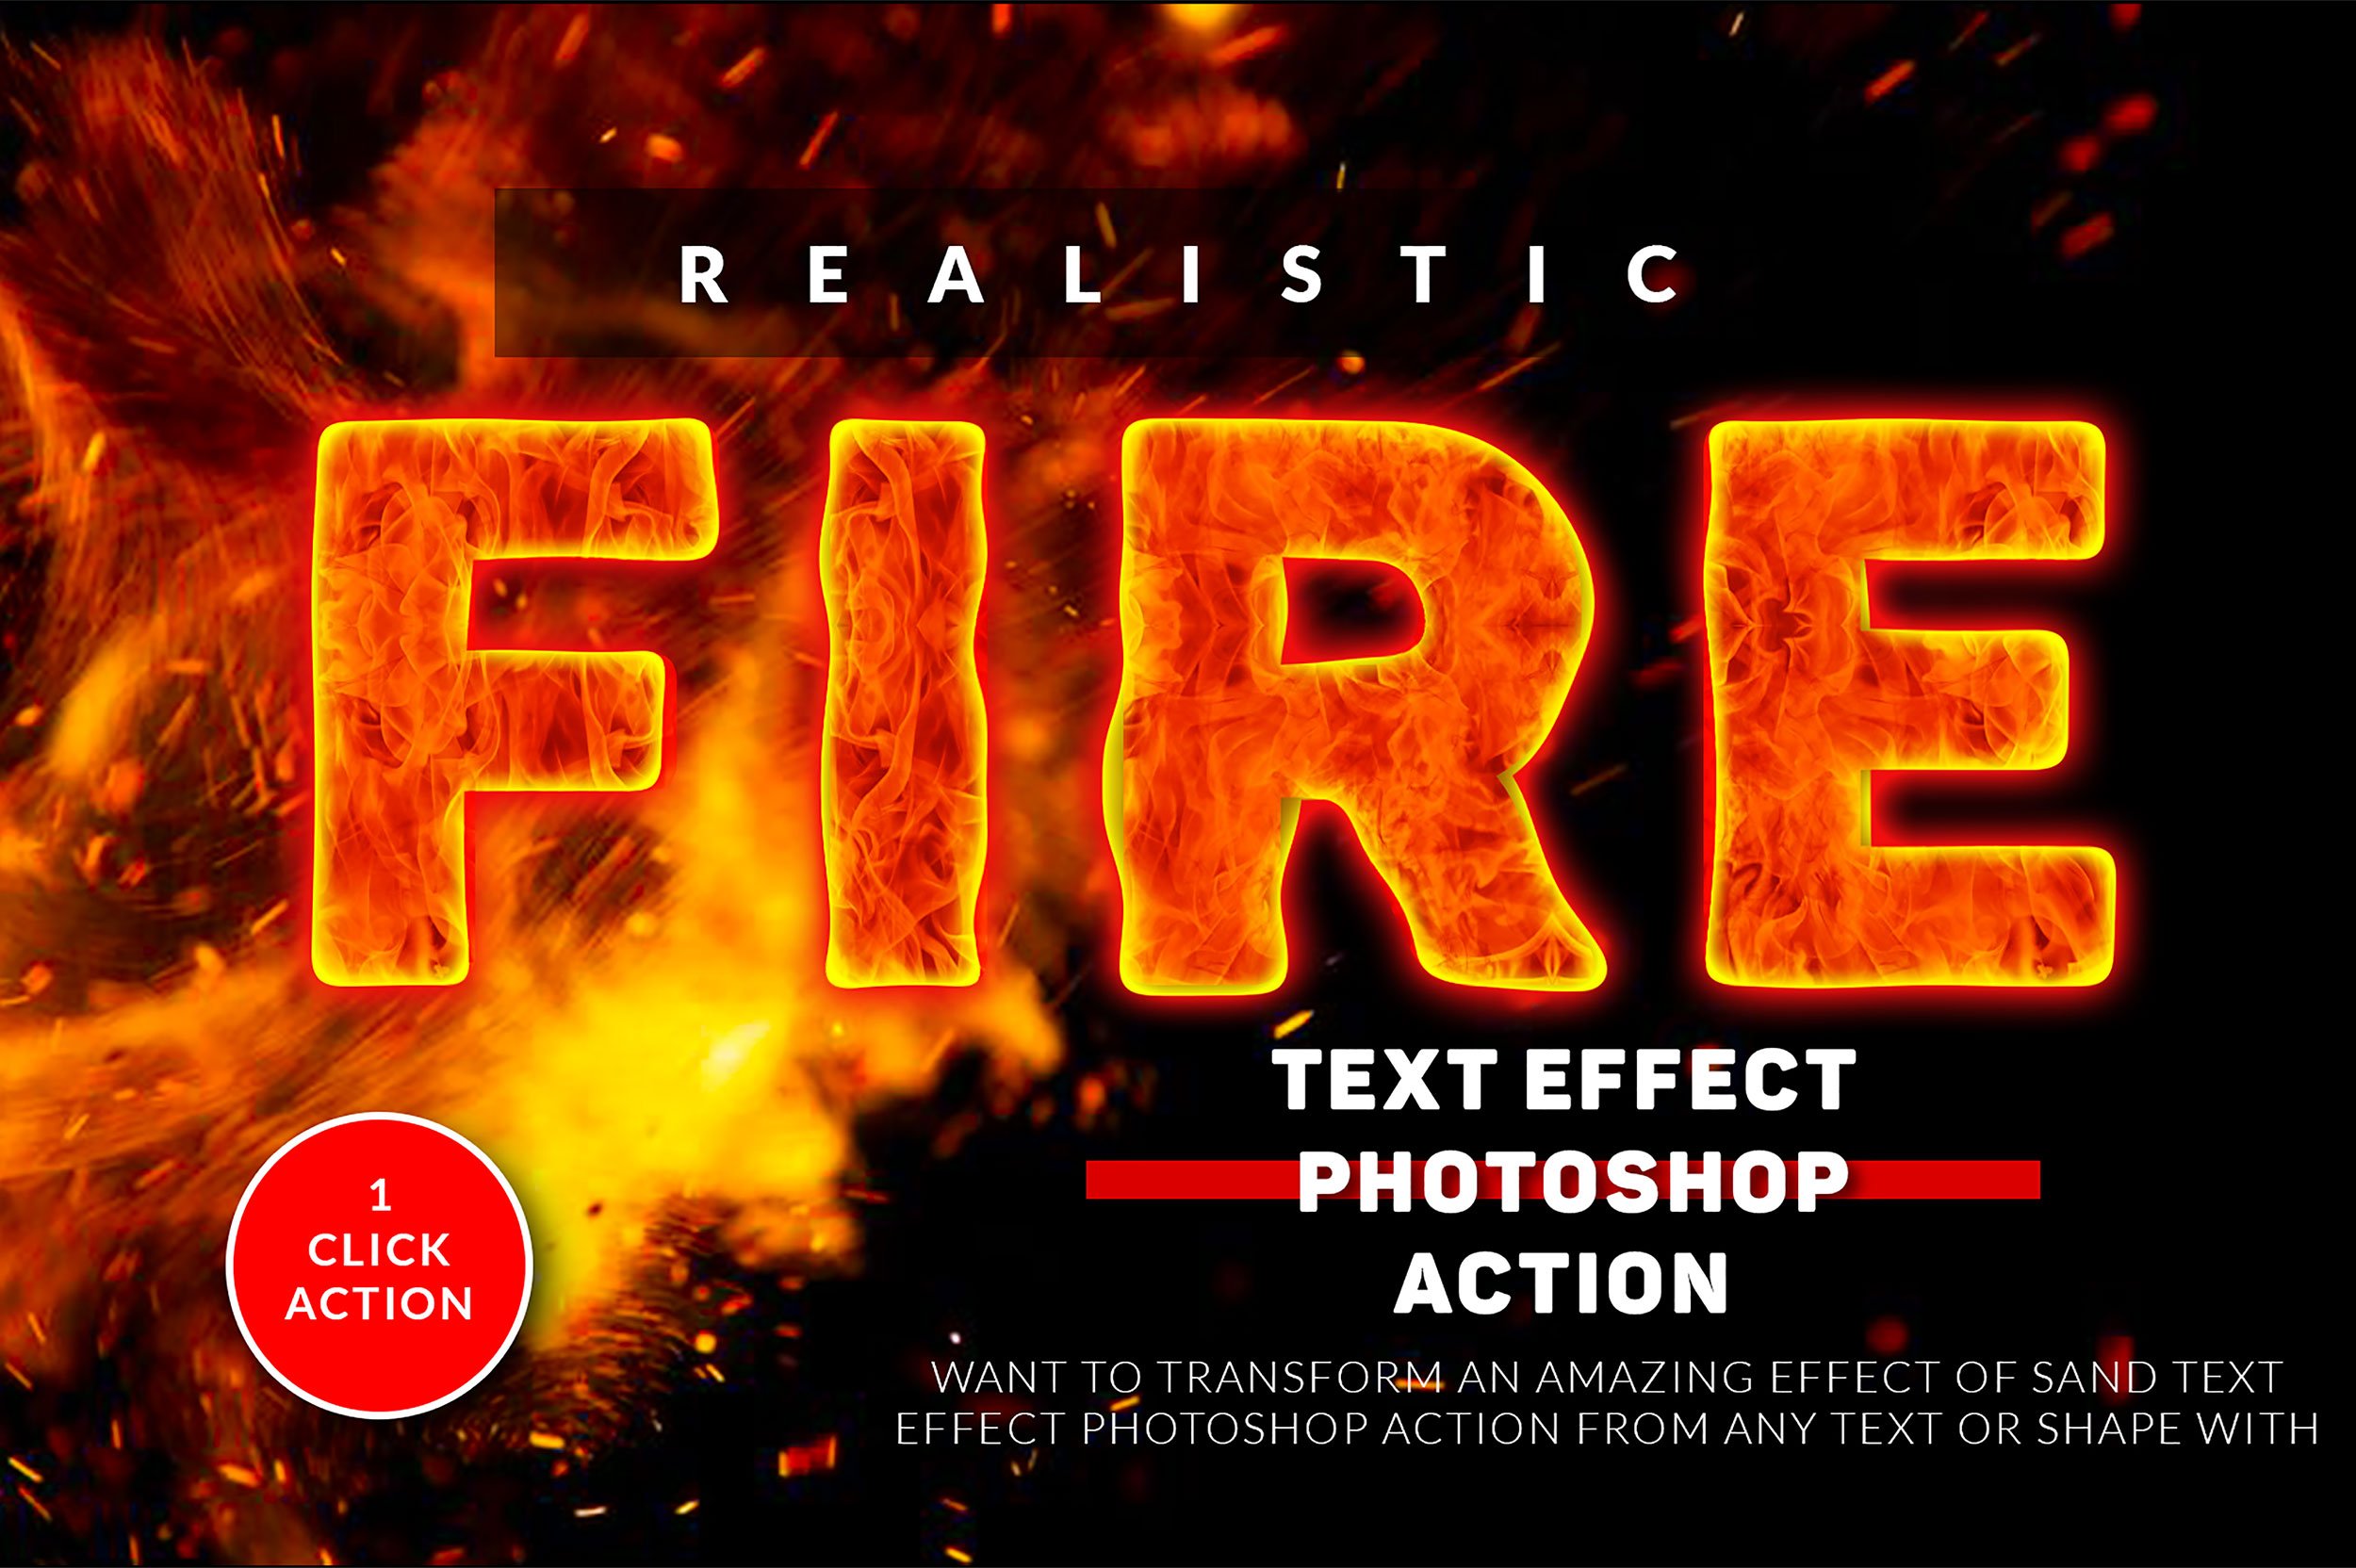 Fire Text Effect Photoshop Actioncover image.